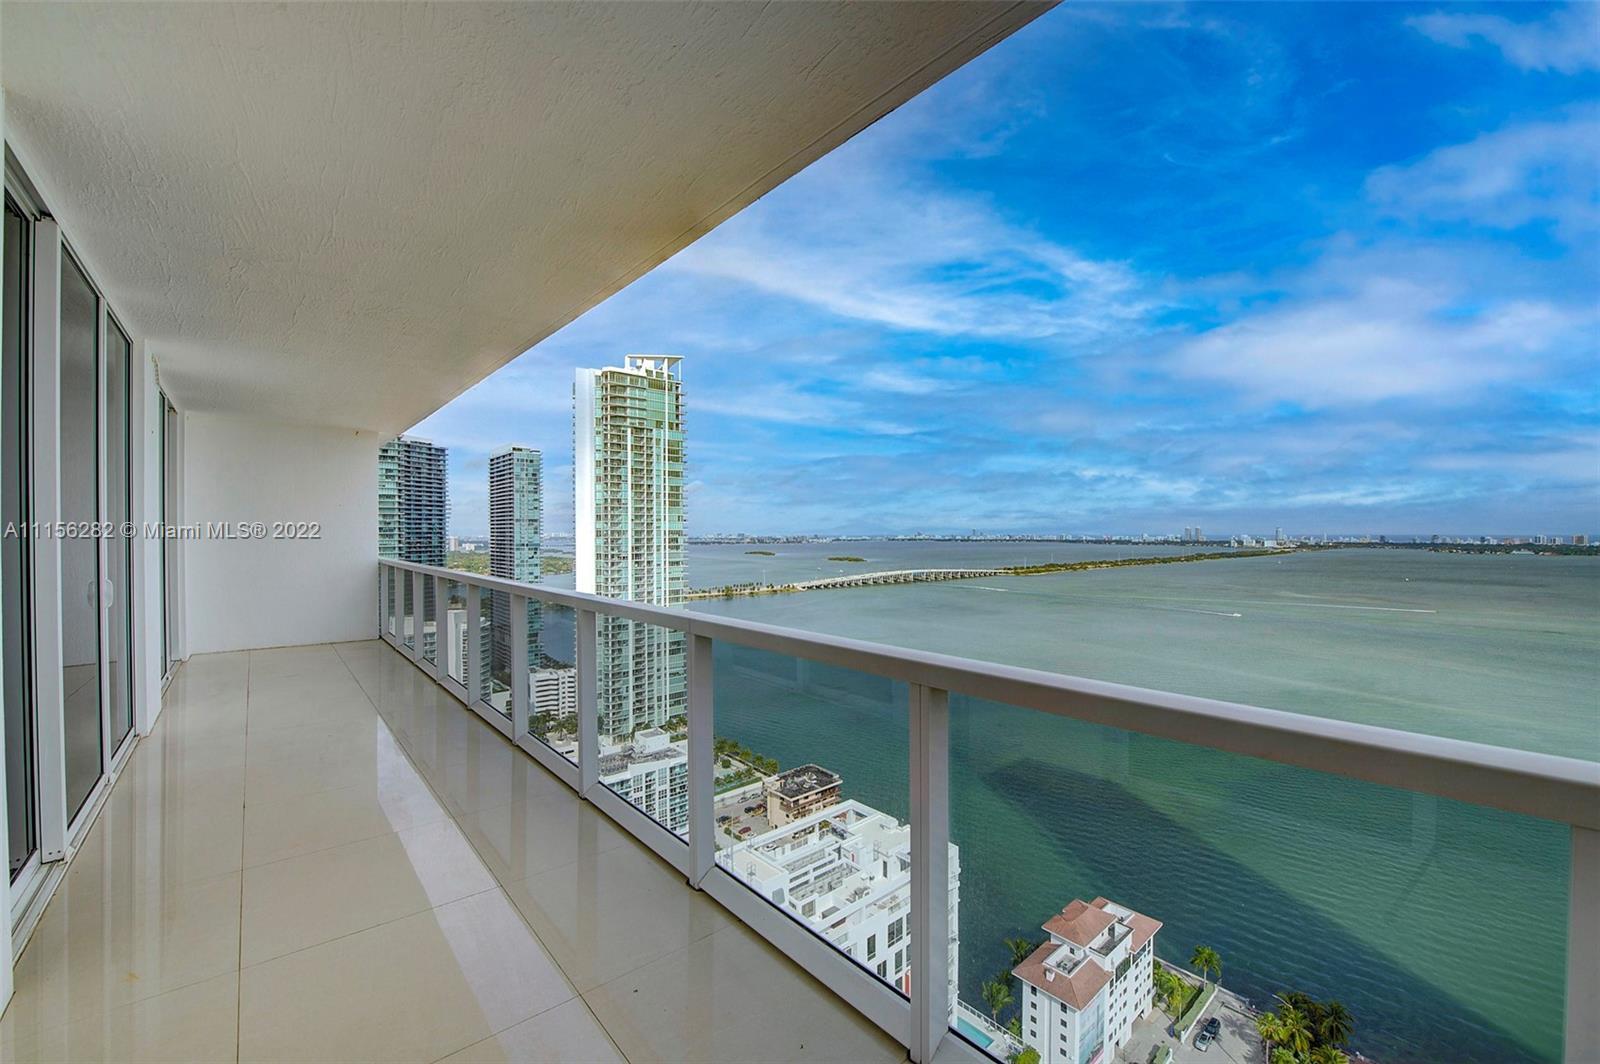 Stunning direct Biscayne Bay views from this huge floor plan featuring 3 bedrooms 3 full bathrooms, 